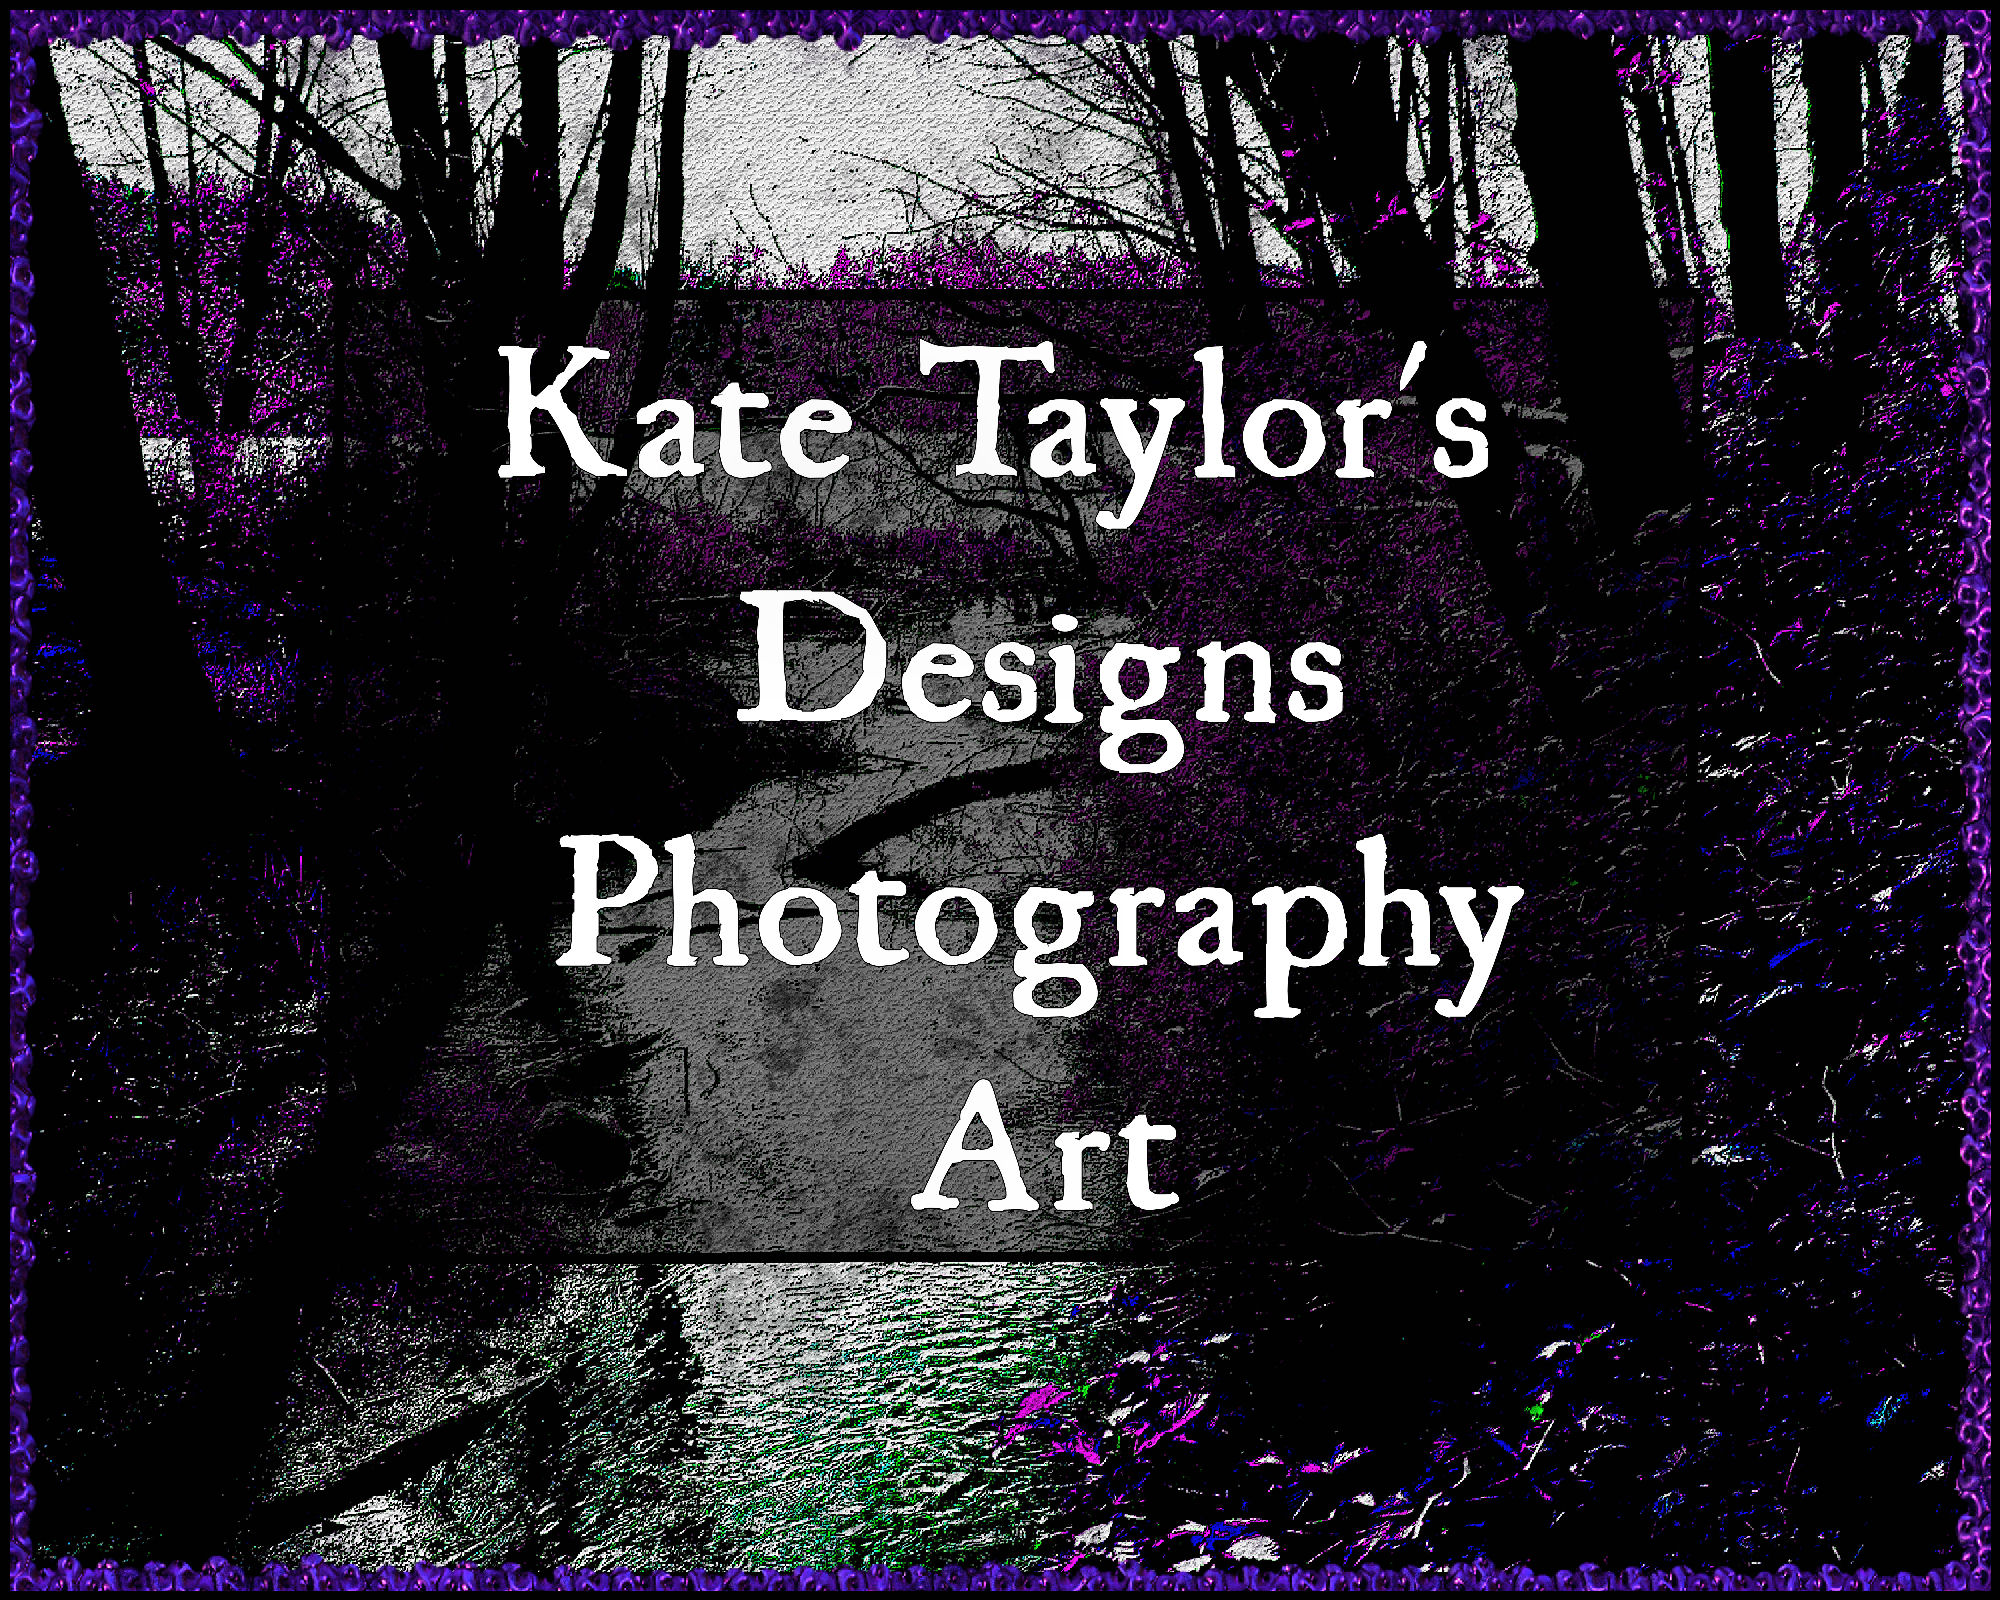 Kate Taylor's Designs, Photography, and Art